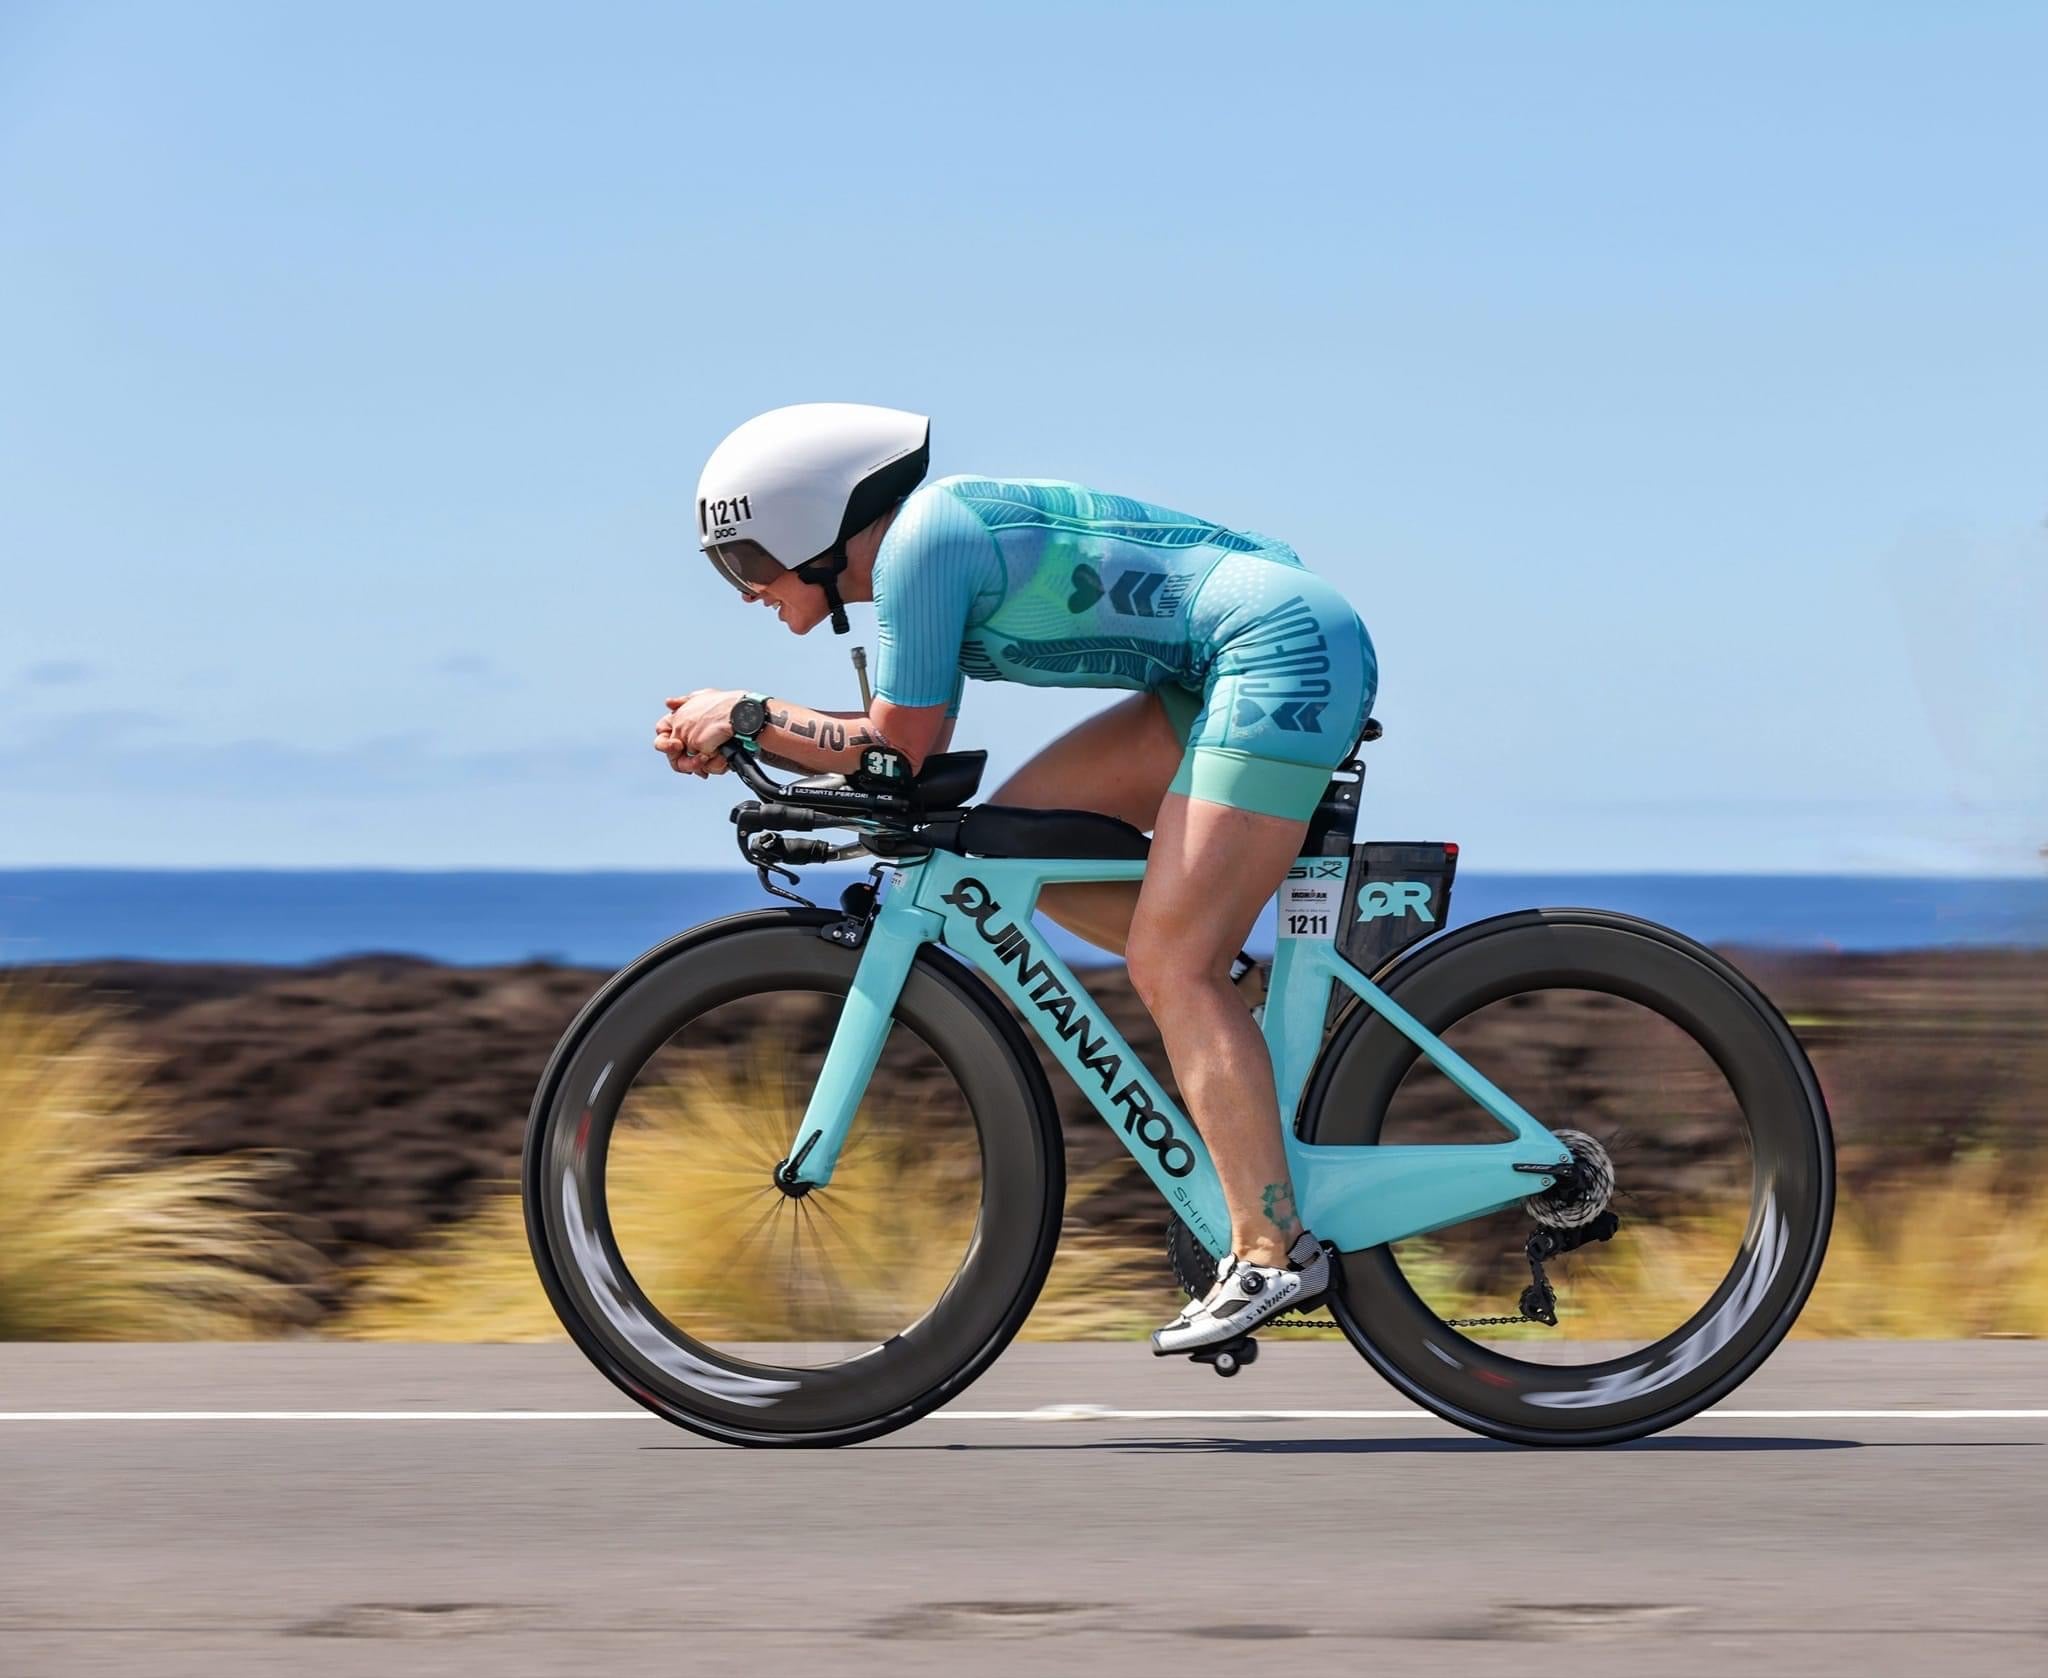 Women's Cycling Kits: We Review The Latest Options – Triathlete